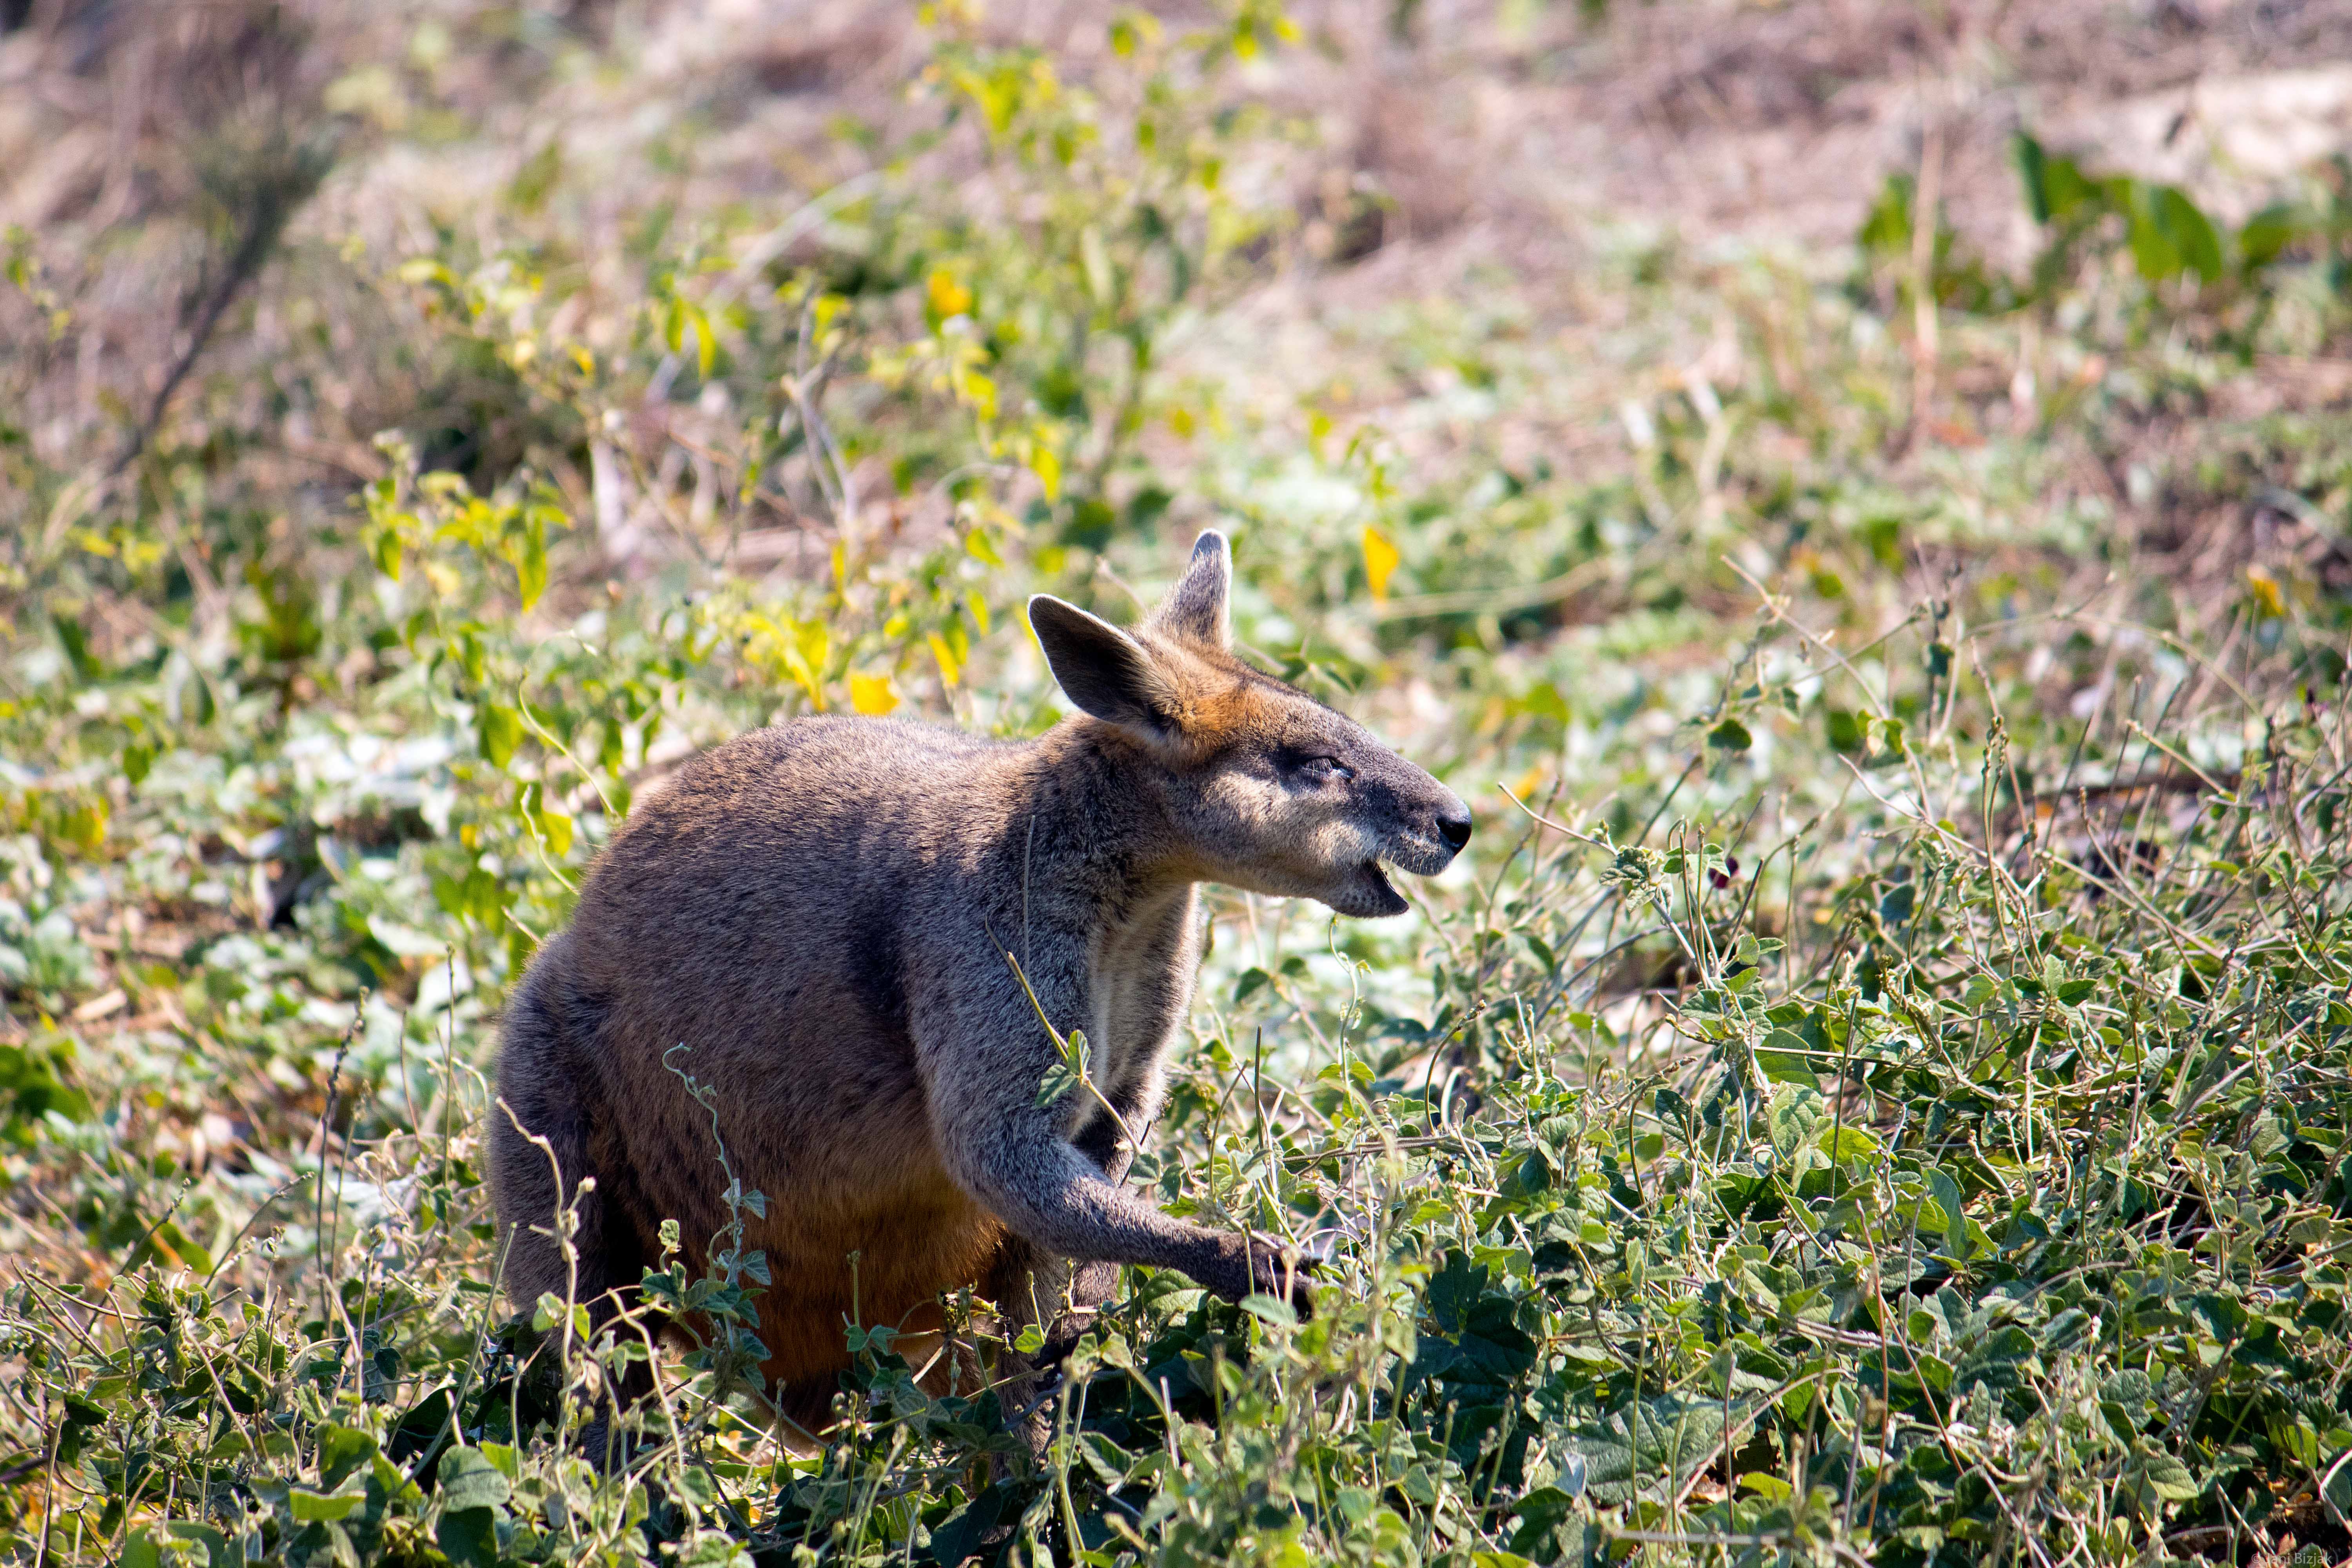 Wallaby - still not sure what exactly is difference between wallaby and kangaroo. 